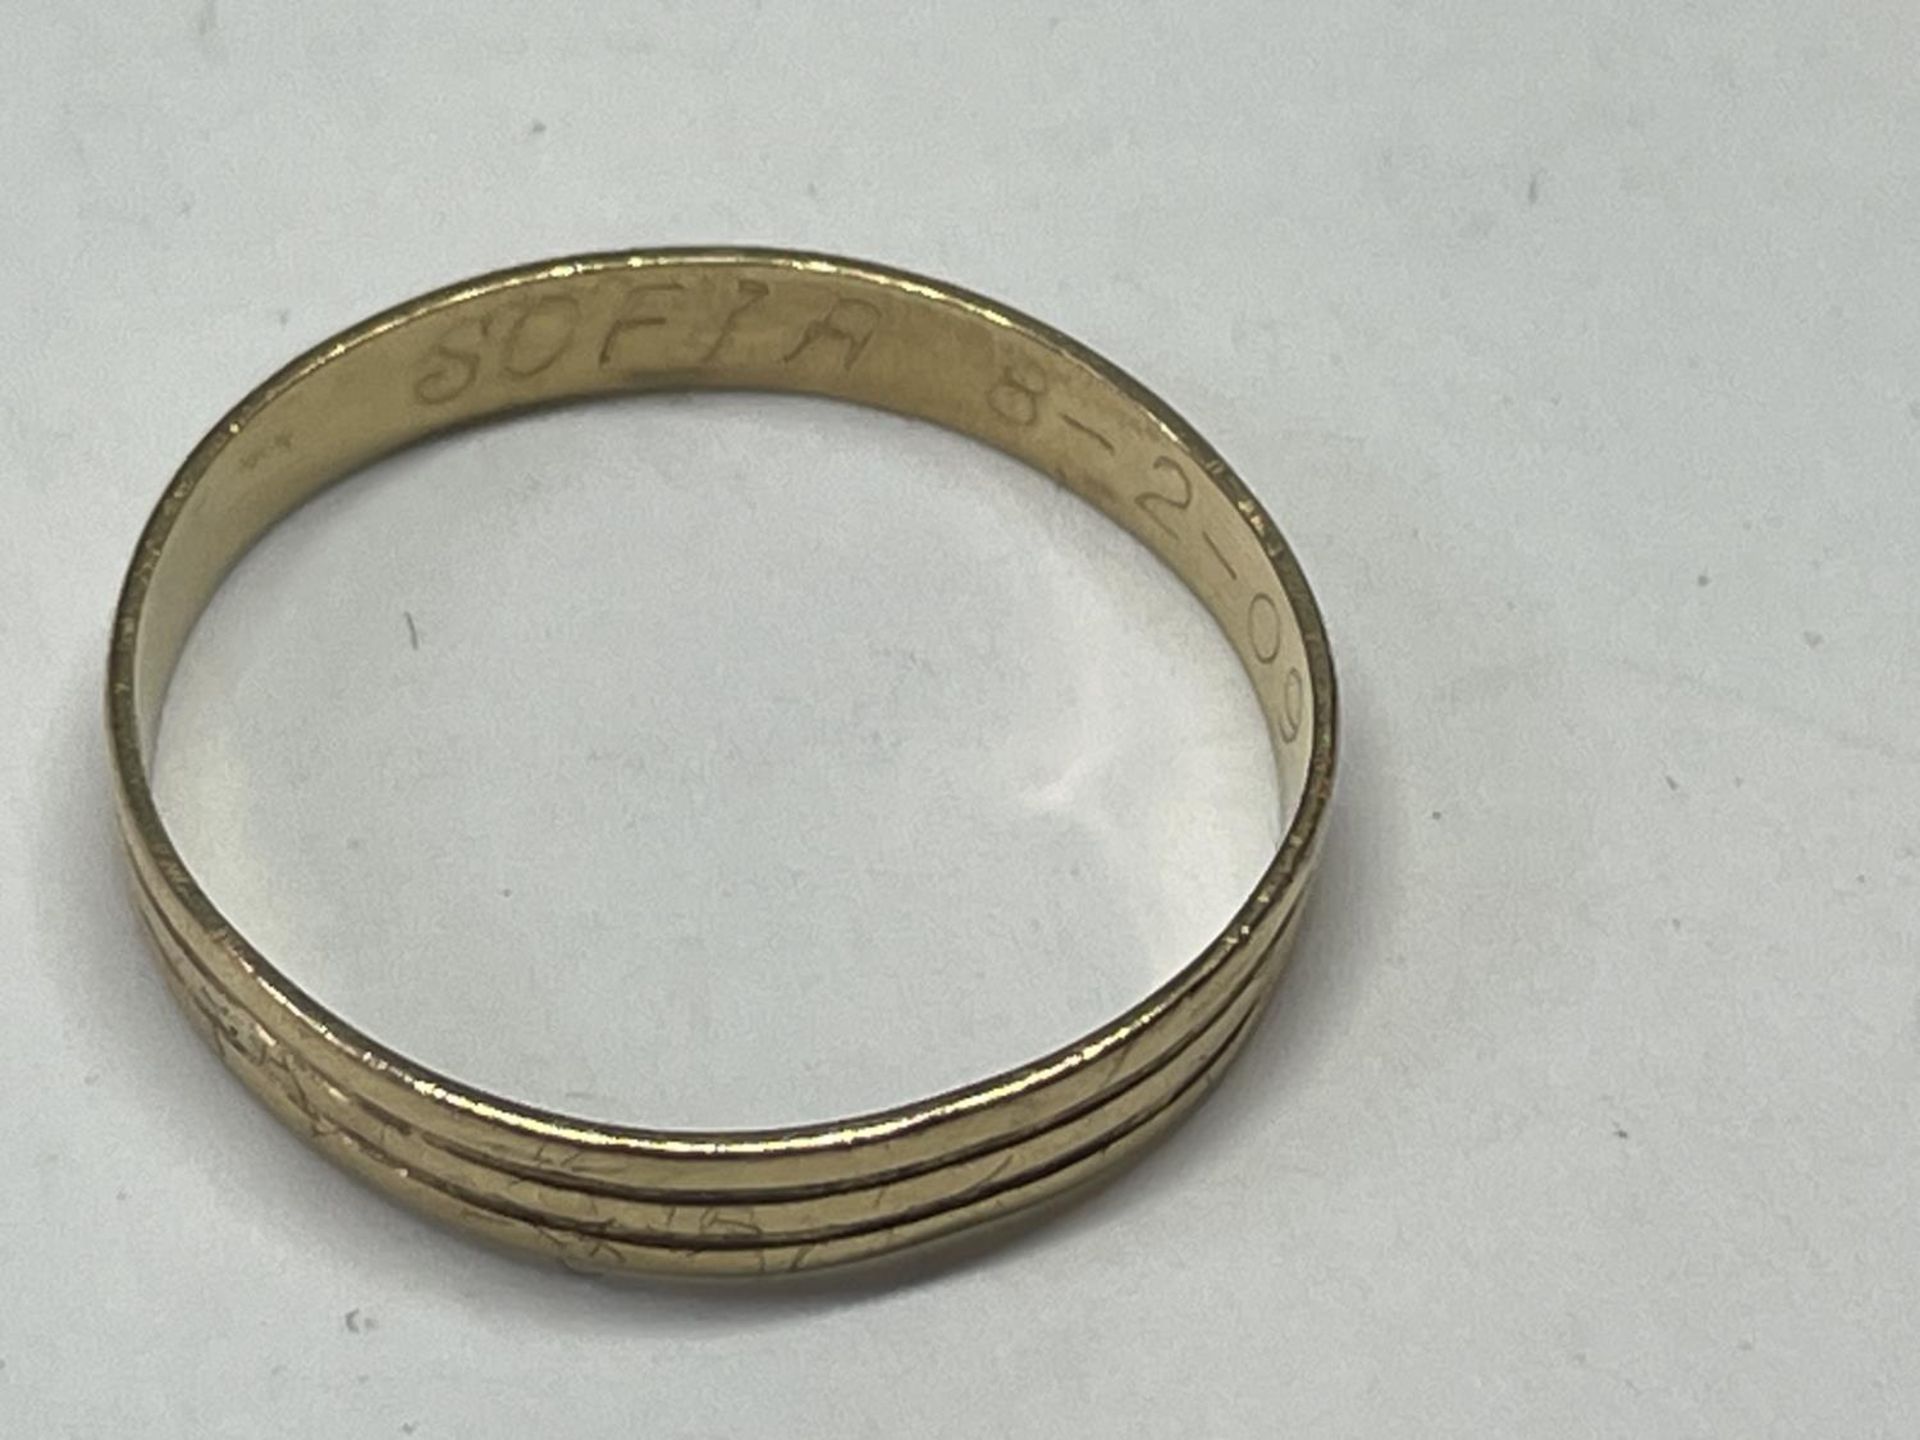 A TESTED TO 9 CARAT GOLD WEDDING BAND SIZE R IN A PRESENTATION BOX - Image 3 of 3